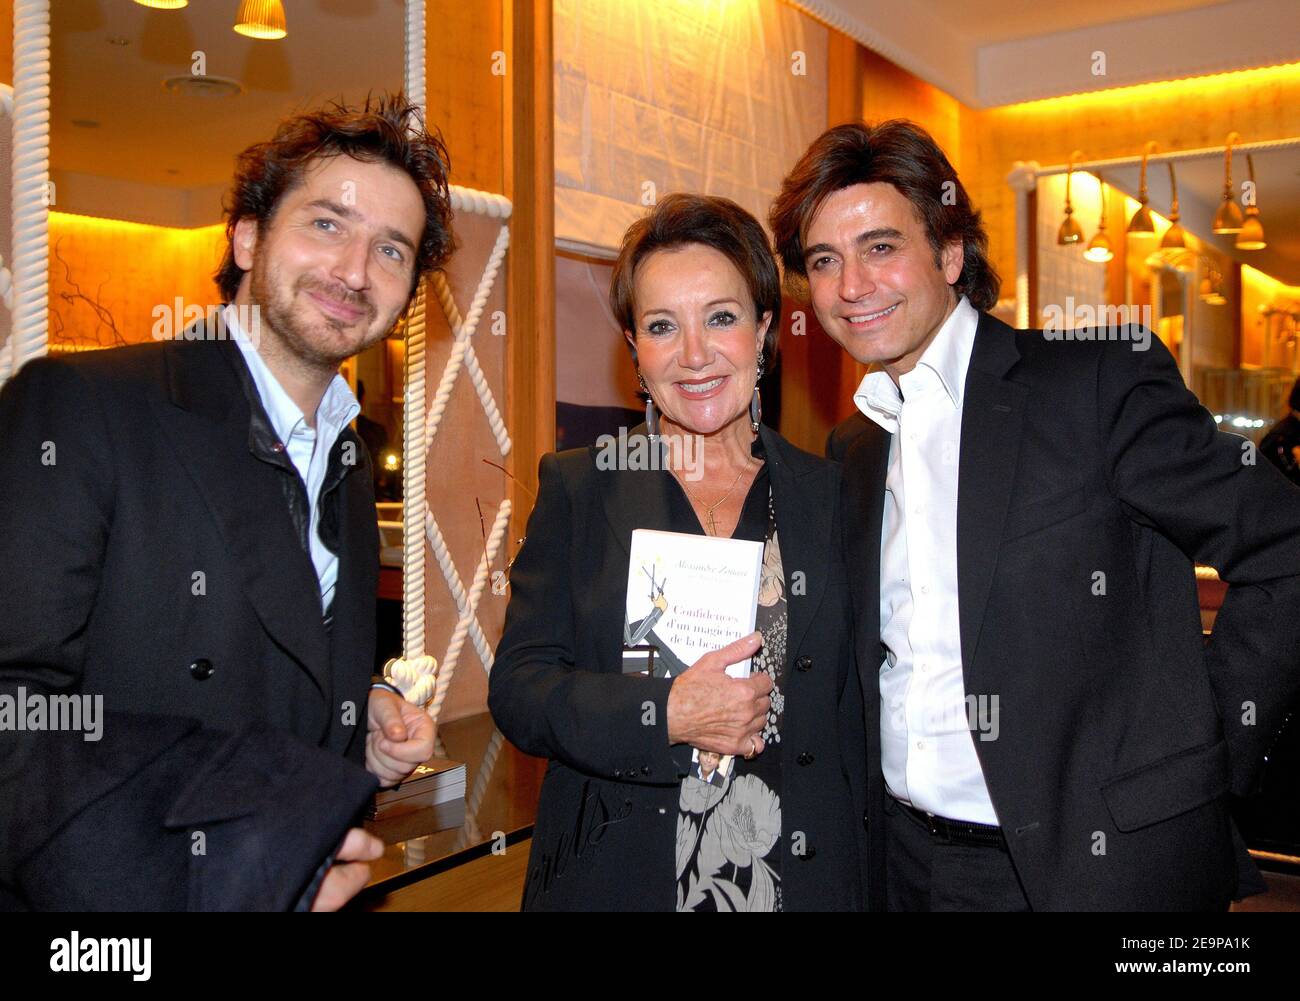 EXCLUSIVE - French actor Edouard Baer, clairvoyant Yaguel Didier and Star hairstylist Alexandre Zouari attend a party for the presentation of Zouaris new book in Paris, France, on November 16, 2006. Photo by Christophe Guibbaud/ABACAPRESS.COM Stock Photo